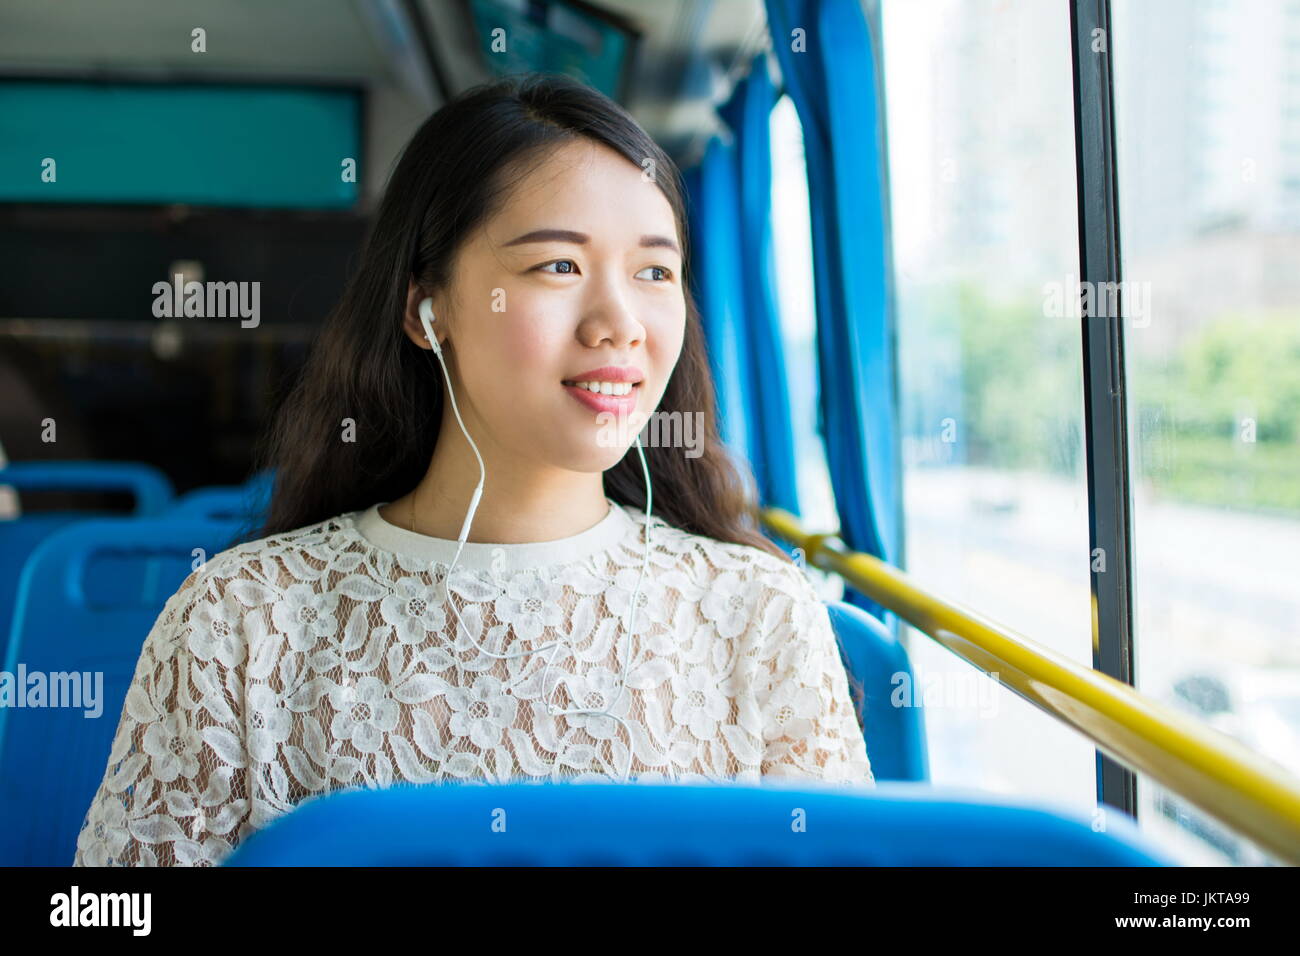 Girl listening to music on a public bus ride Stock Photo